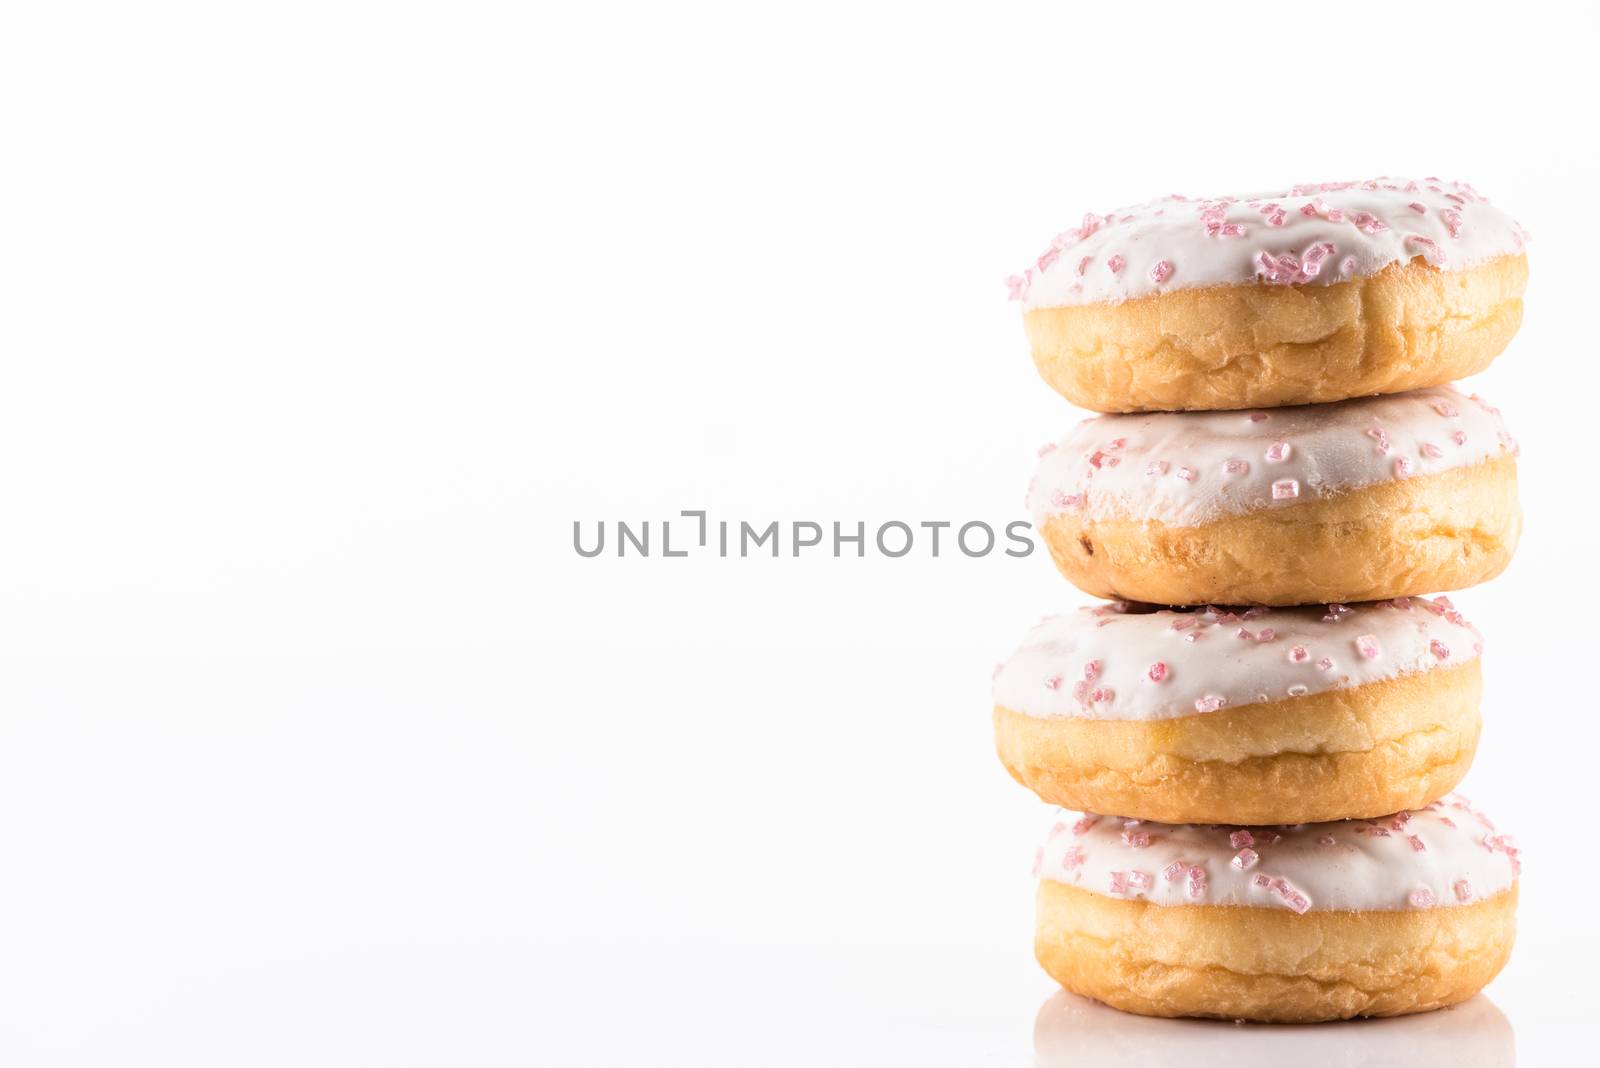 White Chocolate Donut or Doughnuts on White Reflective Background with Copy Space.